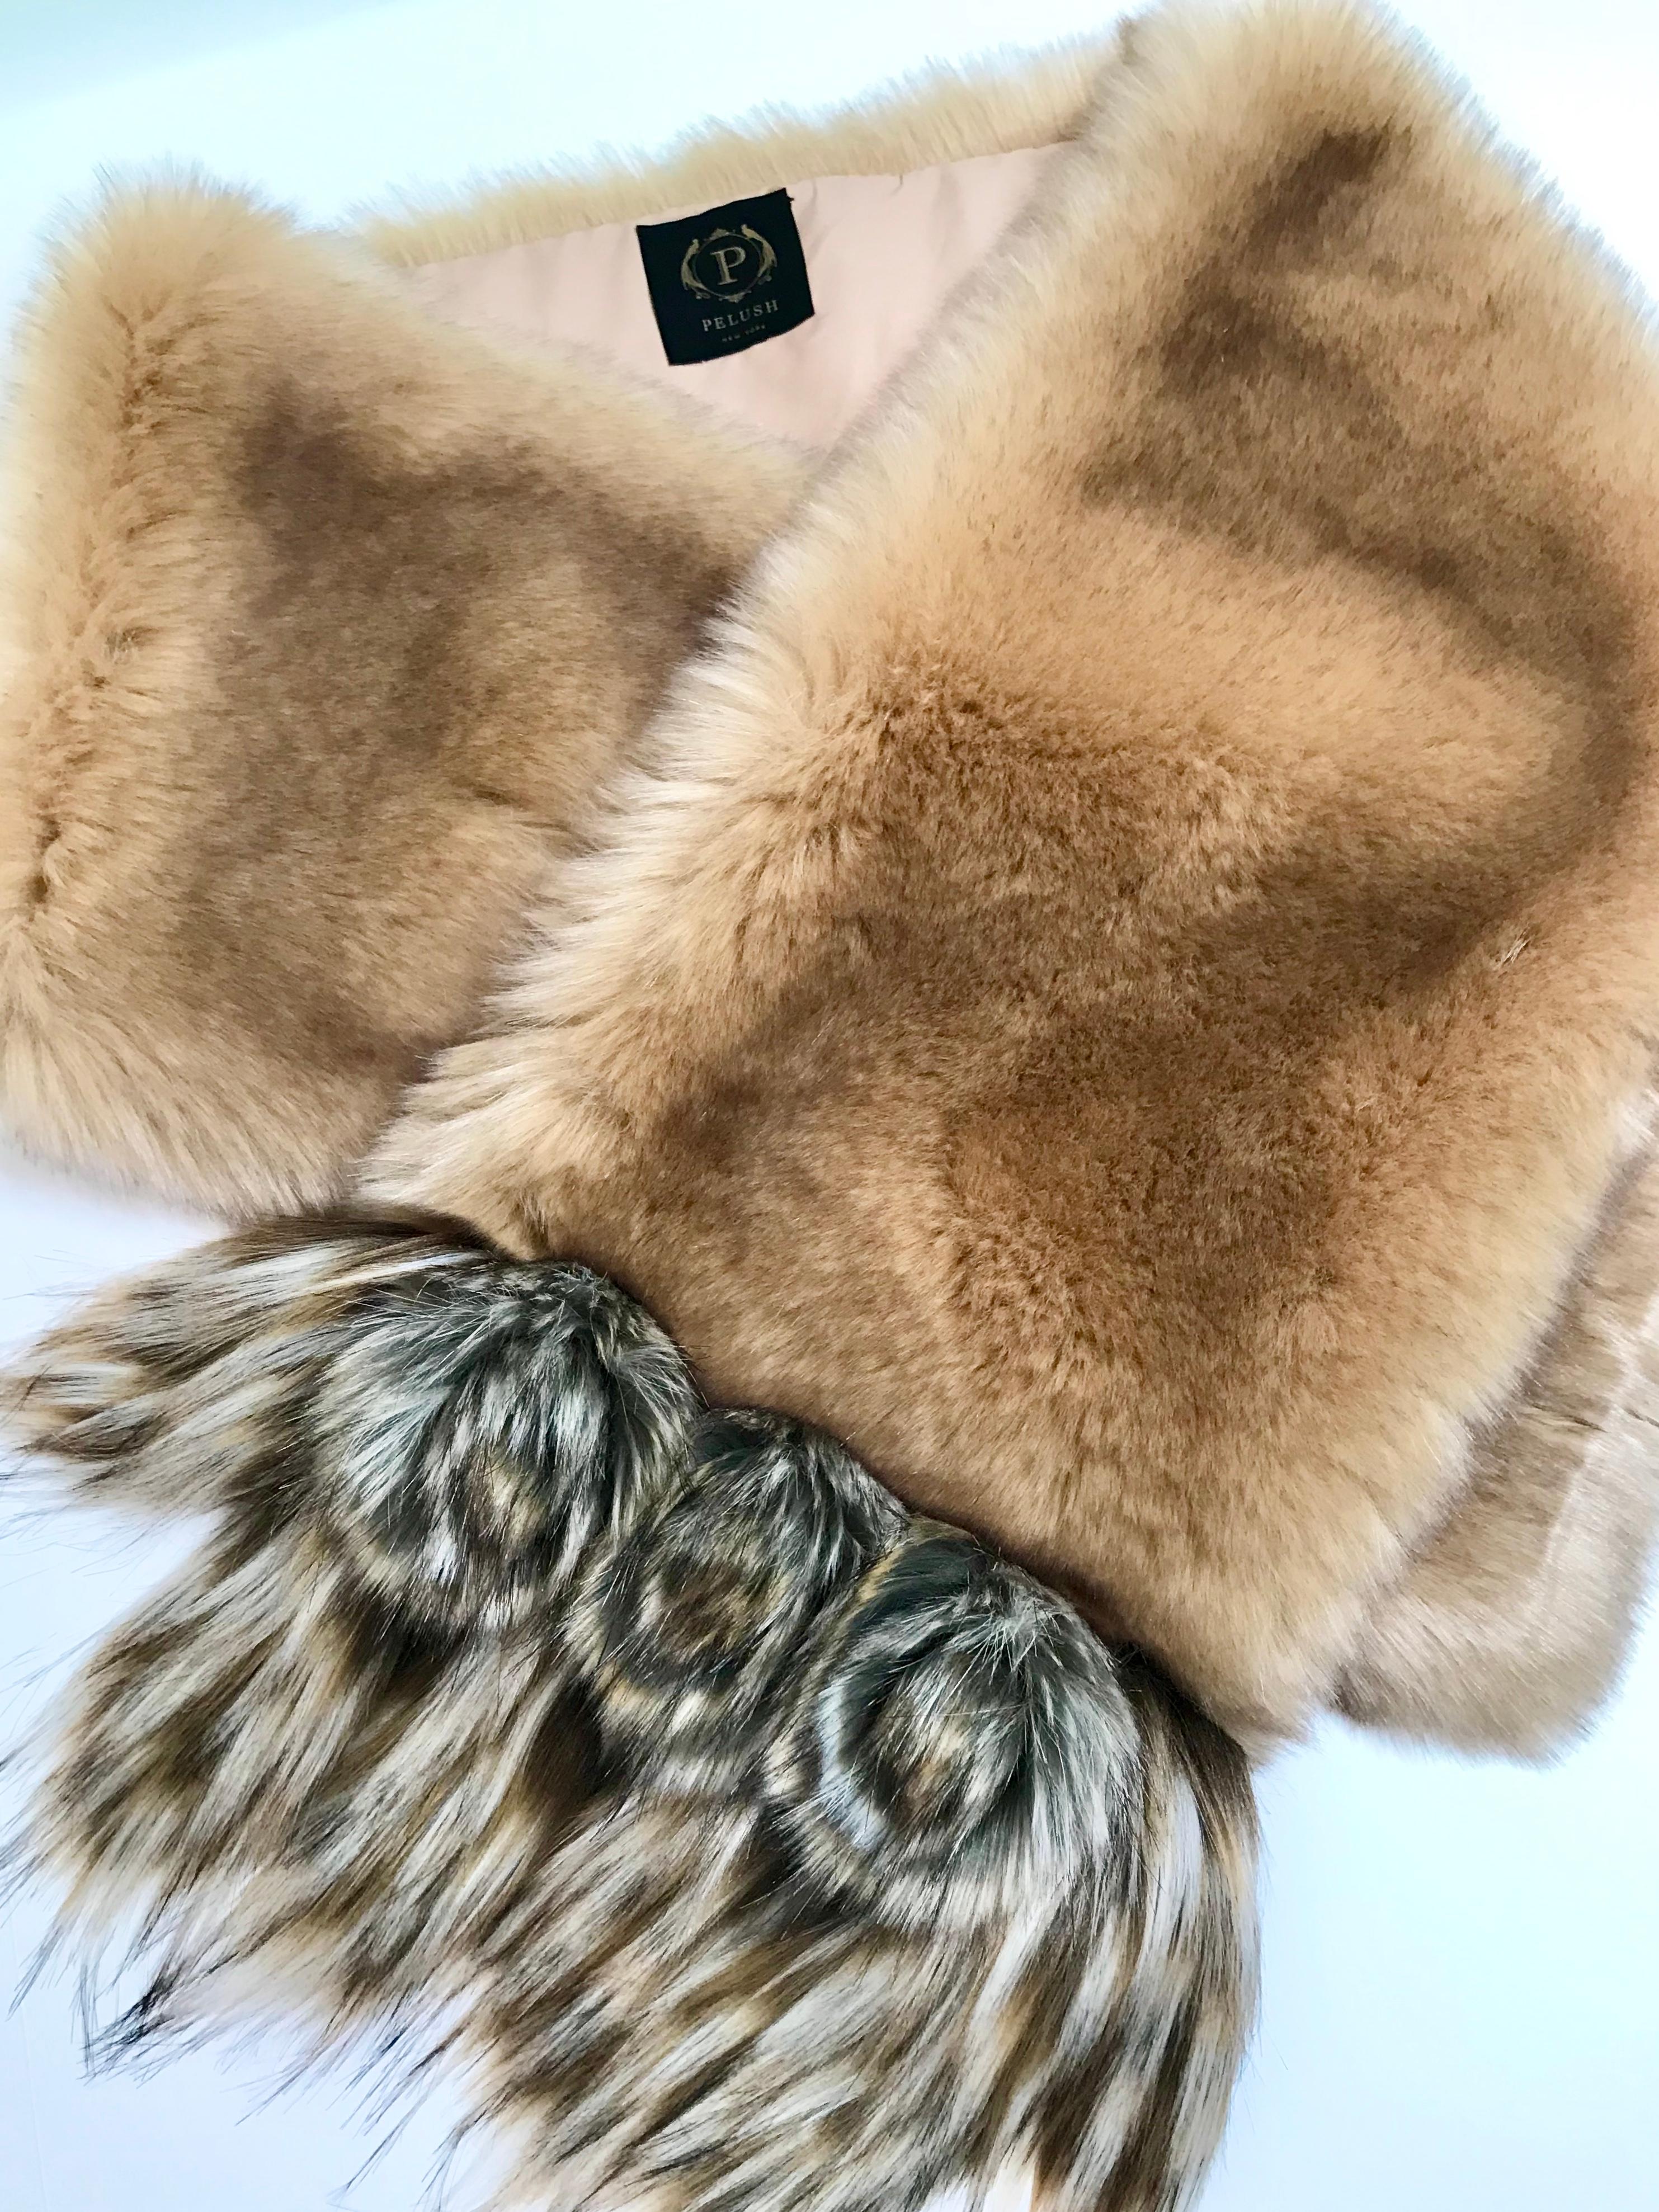 The Stella Pelush champagne faux fur chinchilla wrap/scarf with three dimensional rosettes is a one of a kind exclusive piece.
Highlighted by the highest quality man made pelage this extraordinary fur free accessory is a stunning replica of the